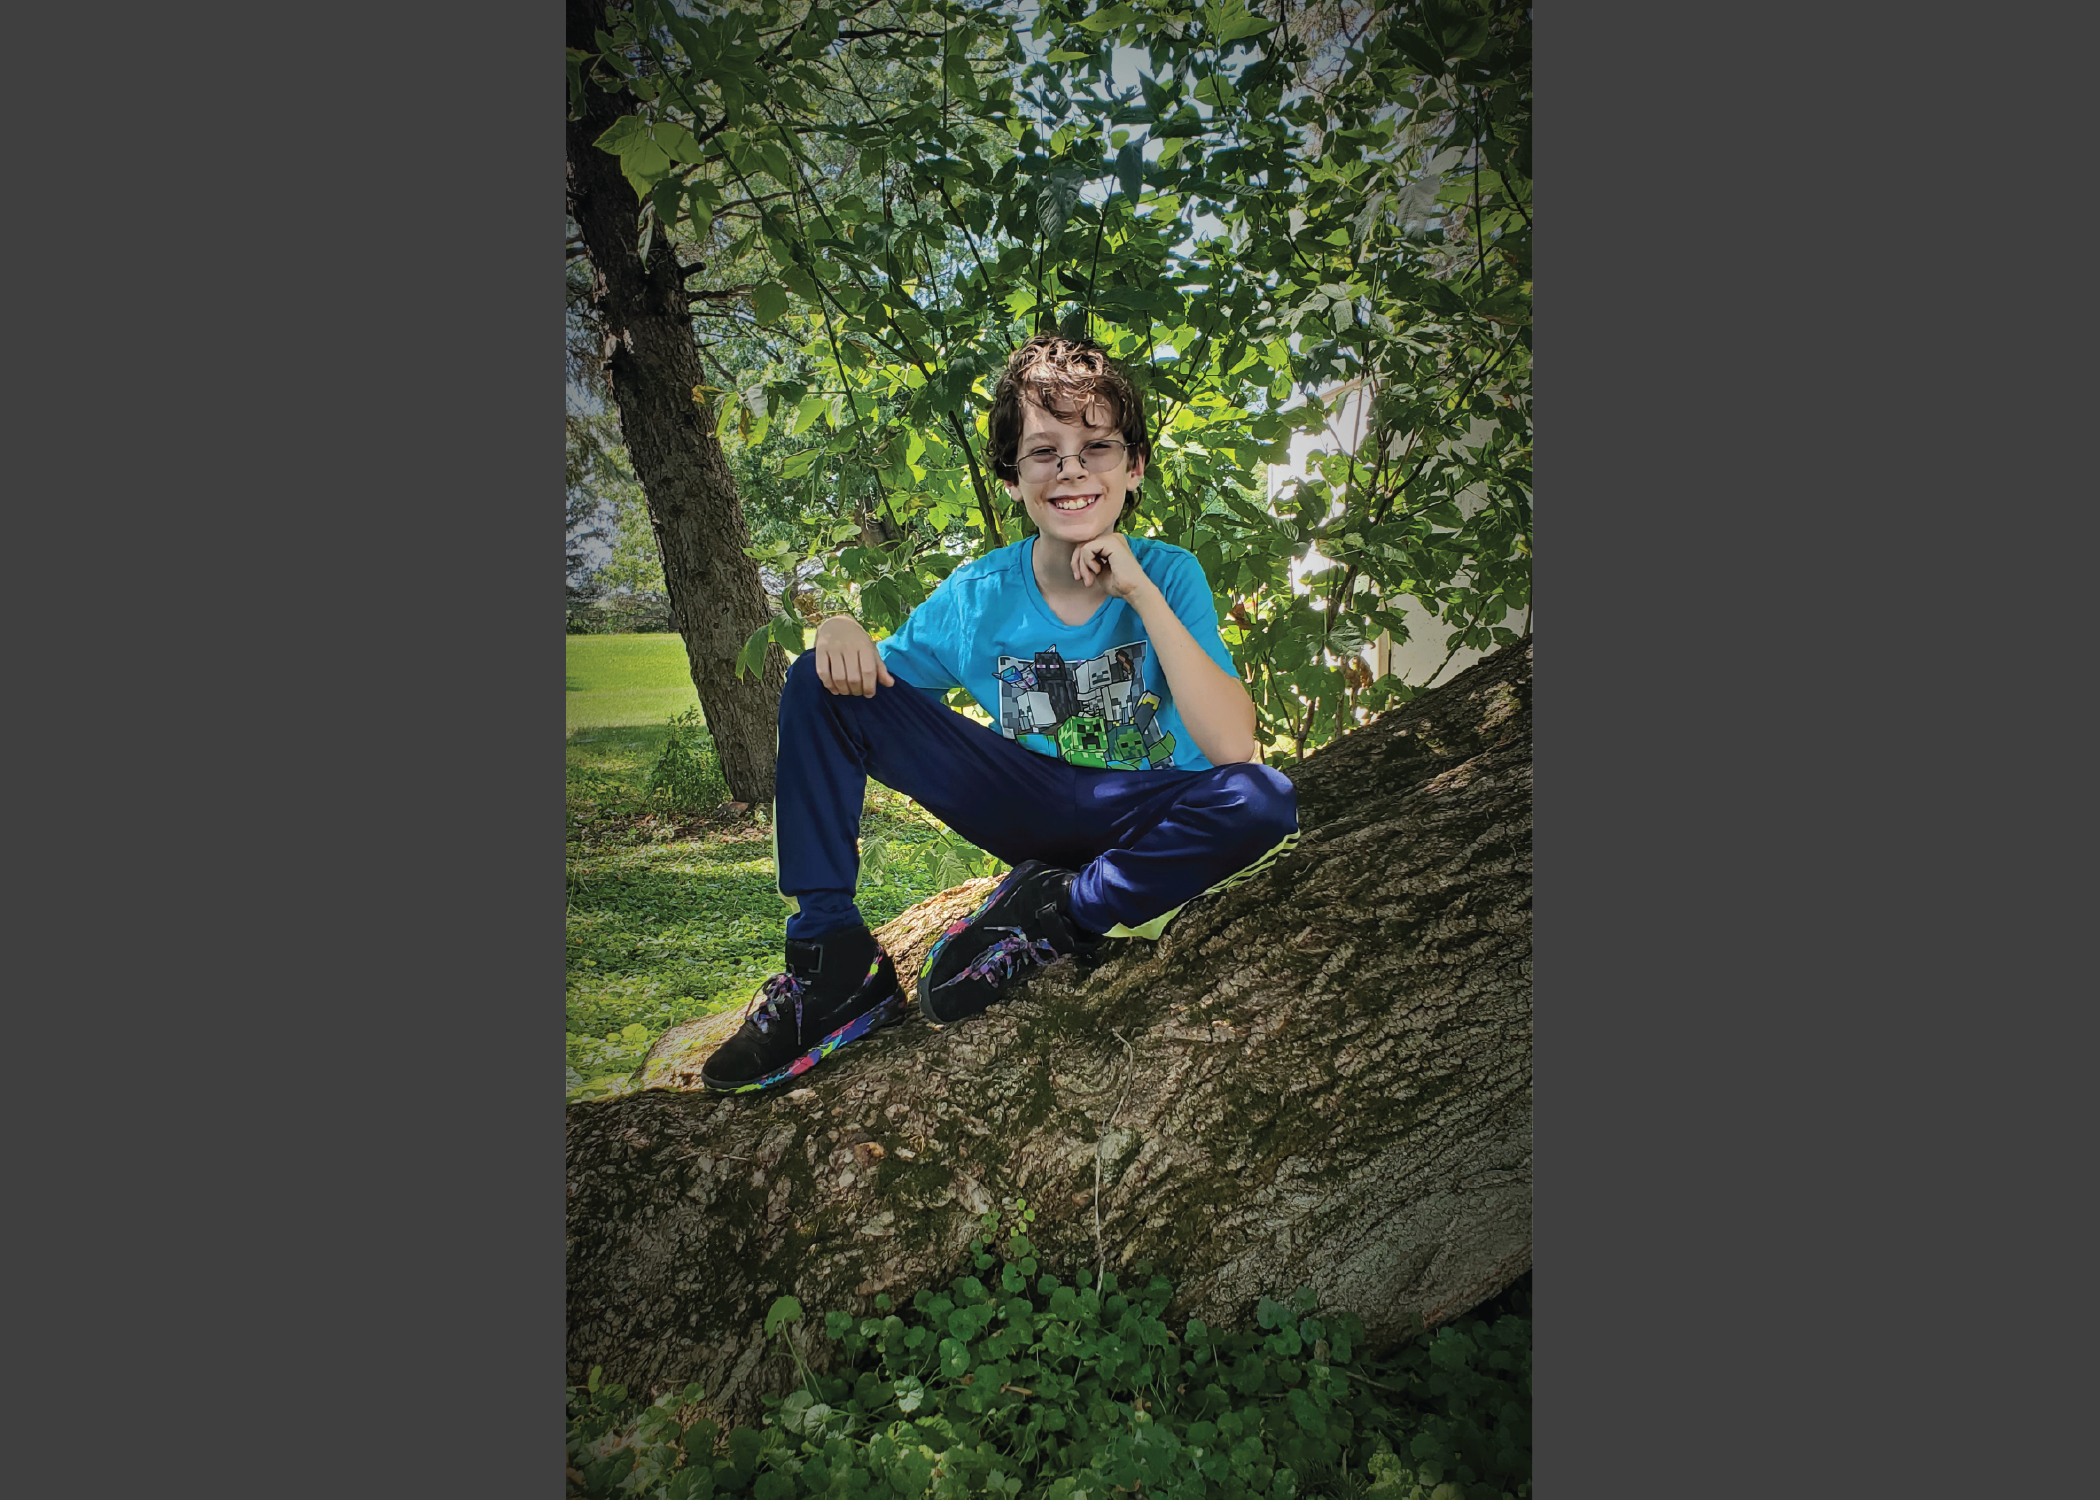 Portrait of a shorthaired brunette boy with glasses sitting on a falen tree outside.